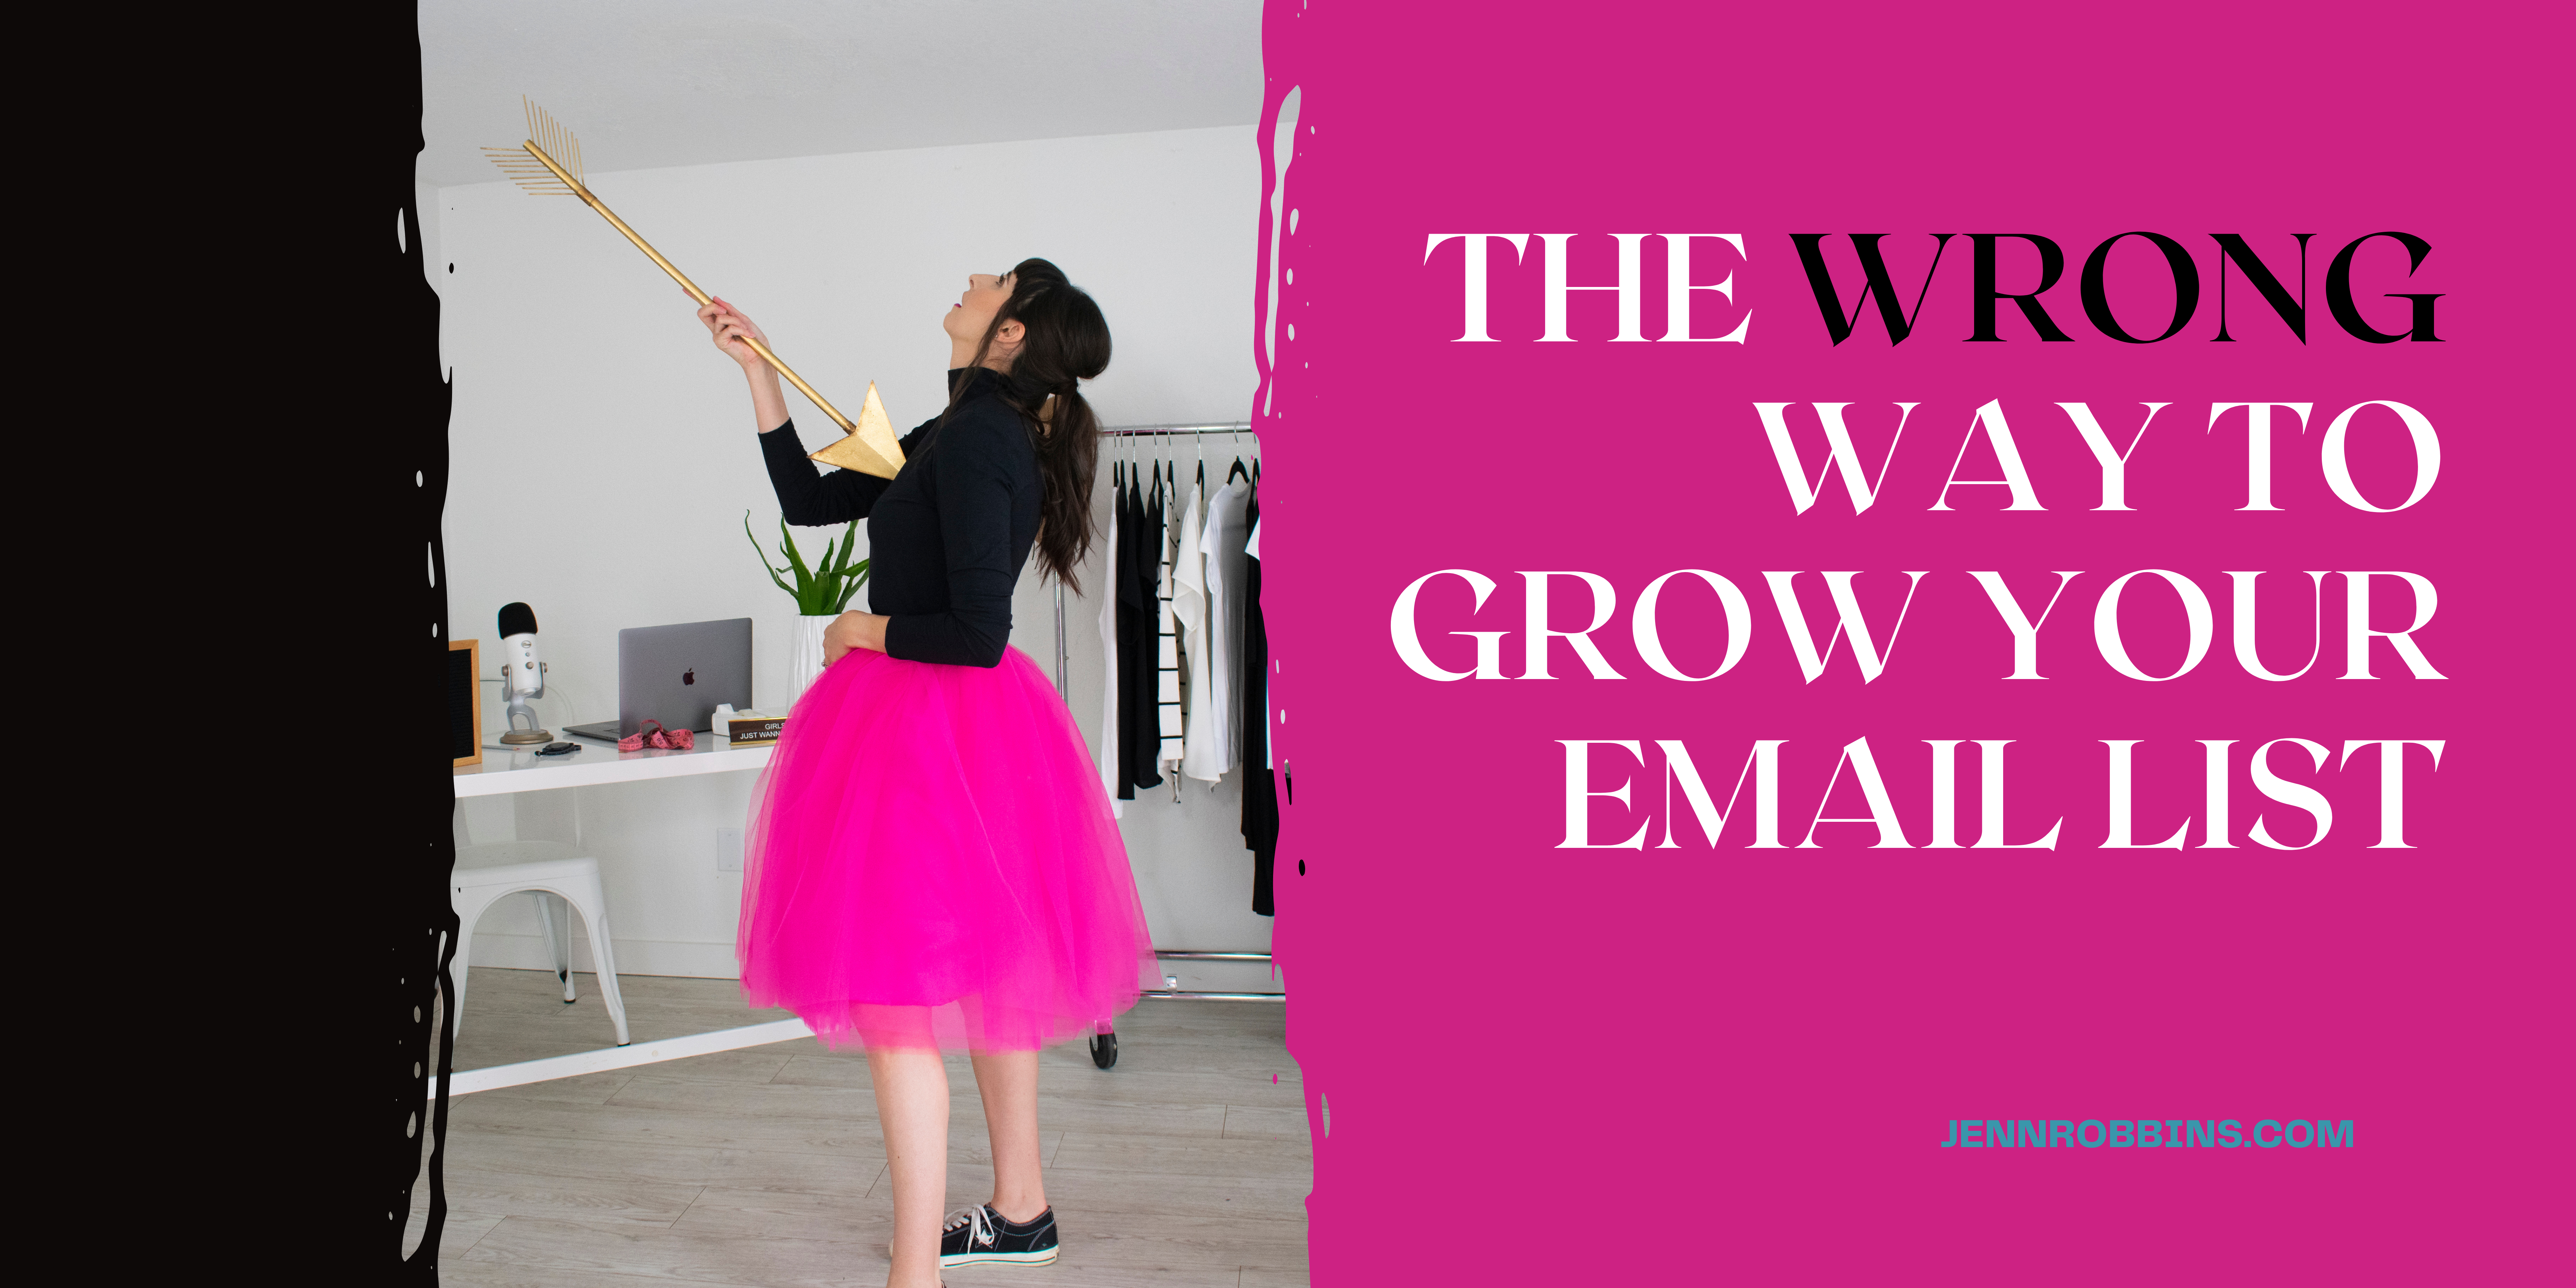 The Wrong Way to Grow Your Email List